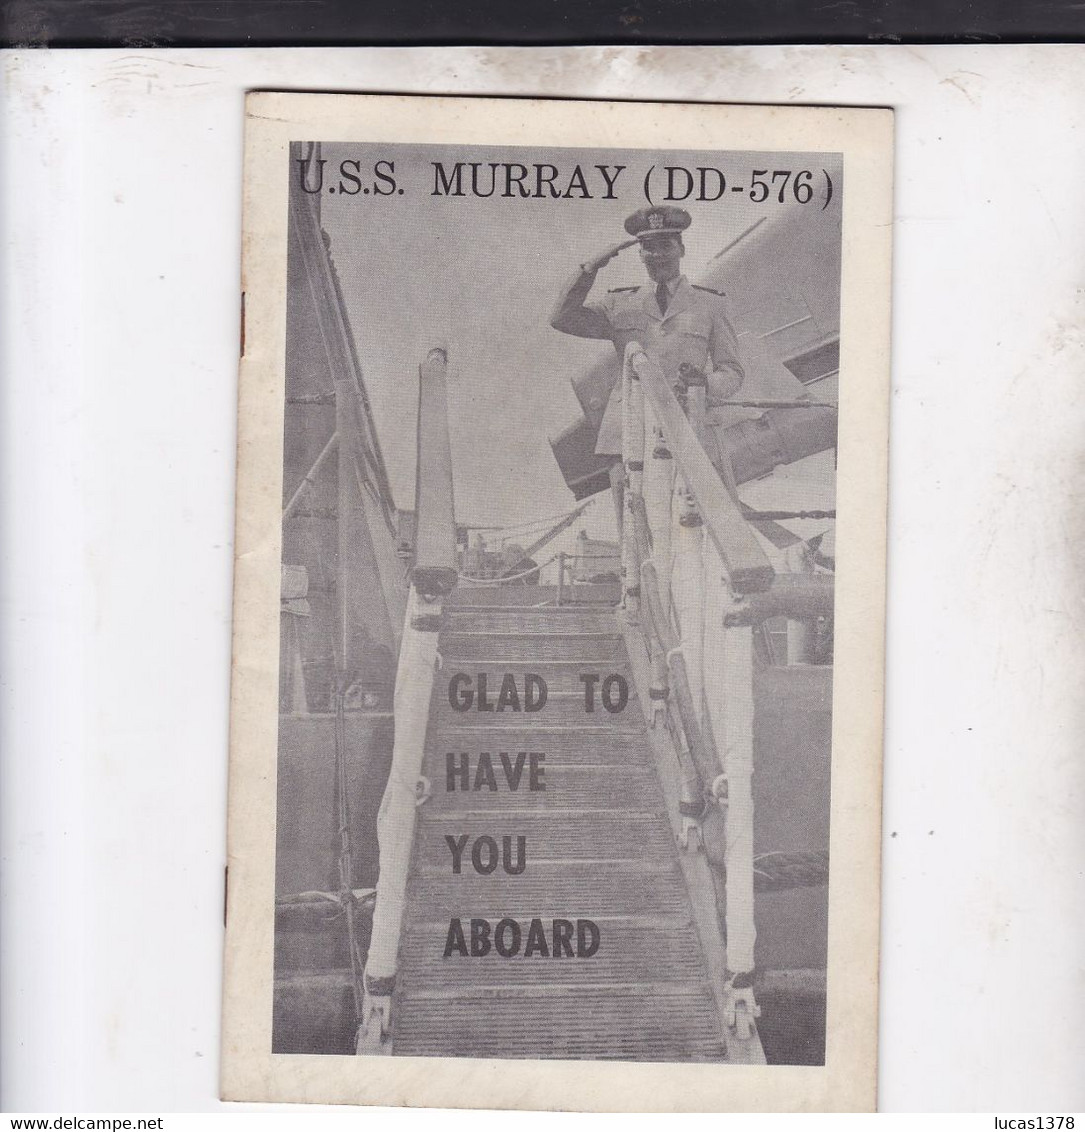 USS MURRAY / DD 576 / GLAD TO HAVE YOU ABOARD / LIVRET DE BORD 8 PAGES / RARE - Forze Armate Americane